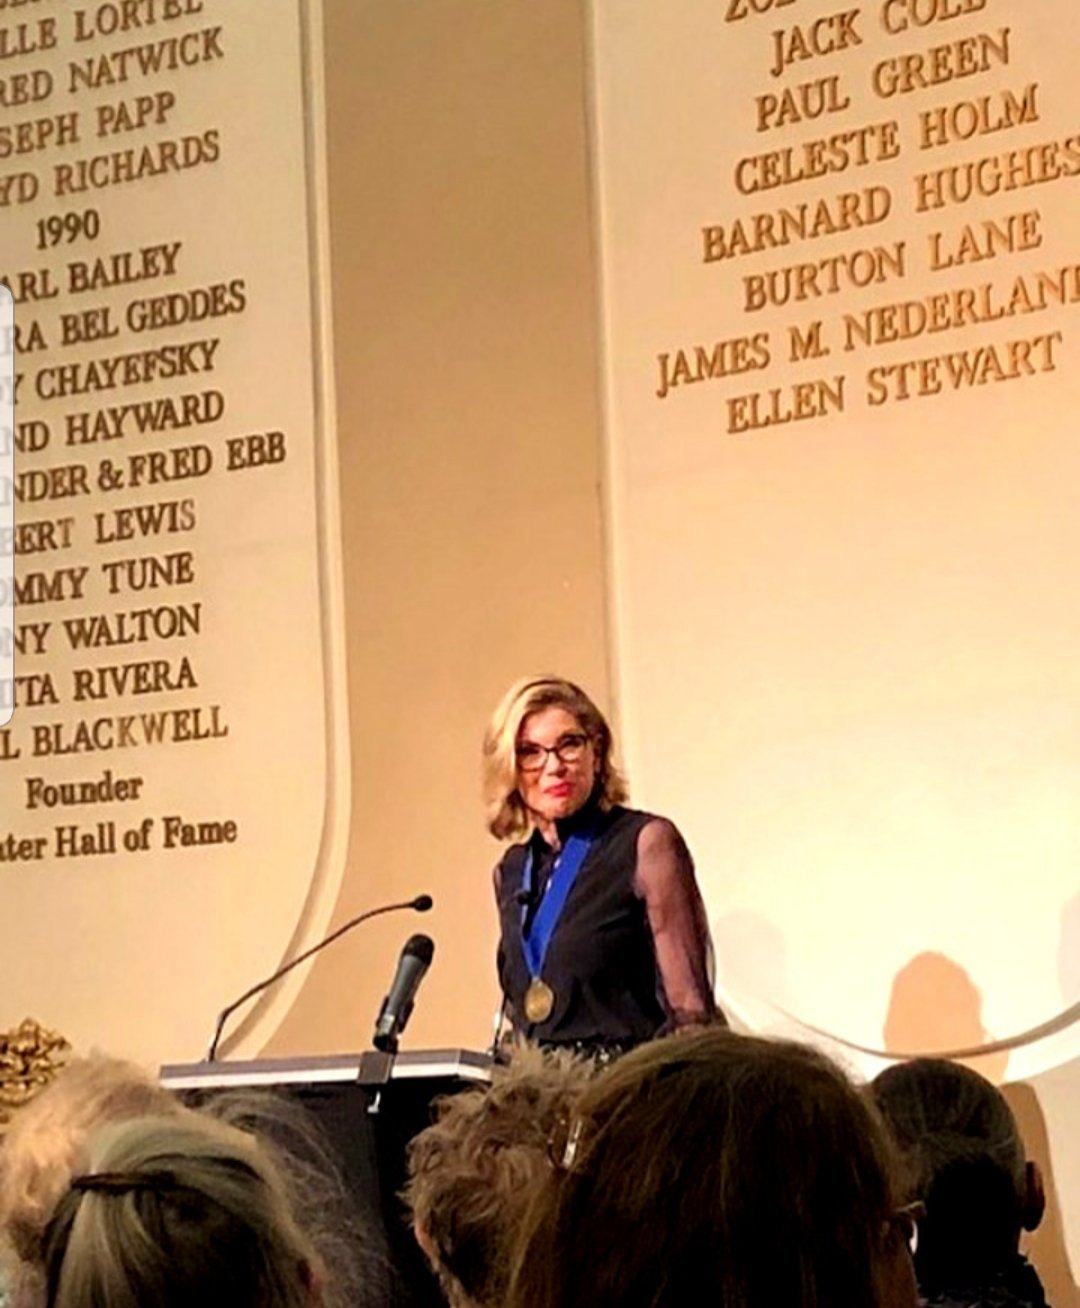 Christine Baranski got inducted into the theatre Hall of Fame in 2018